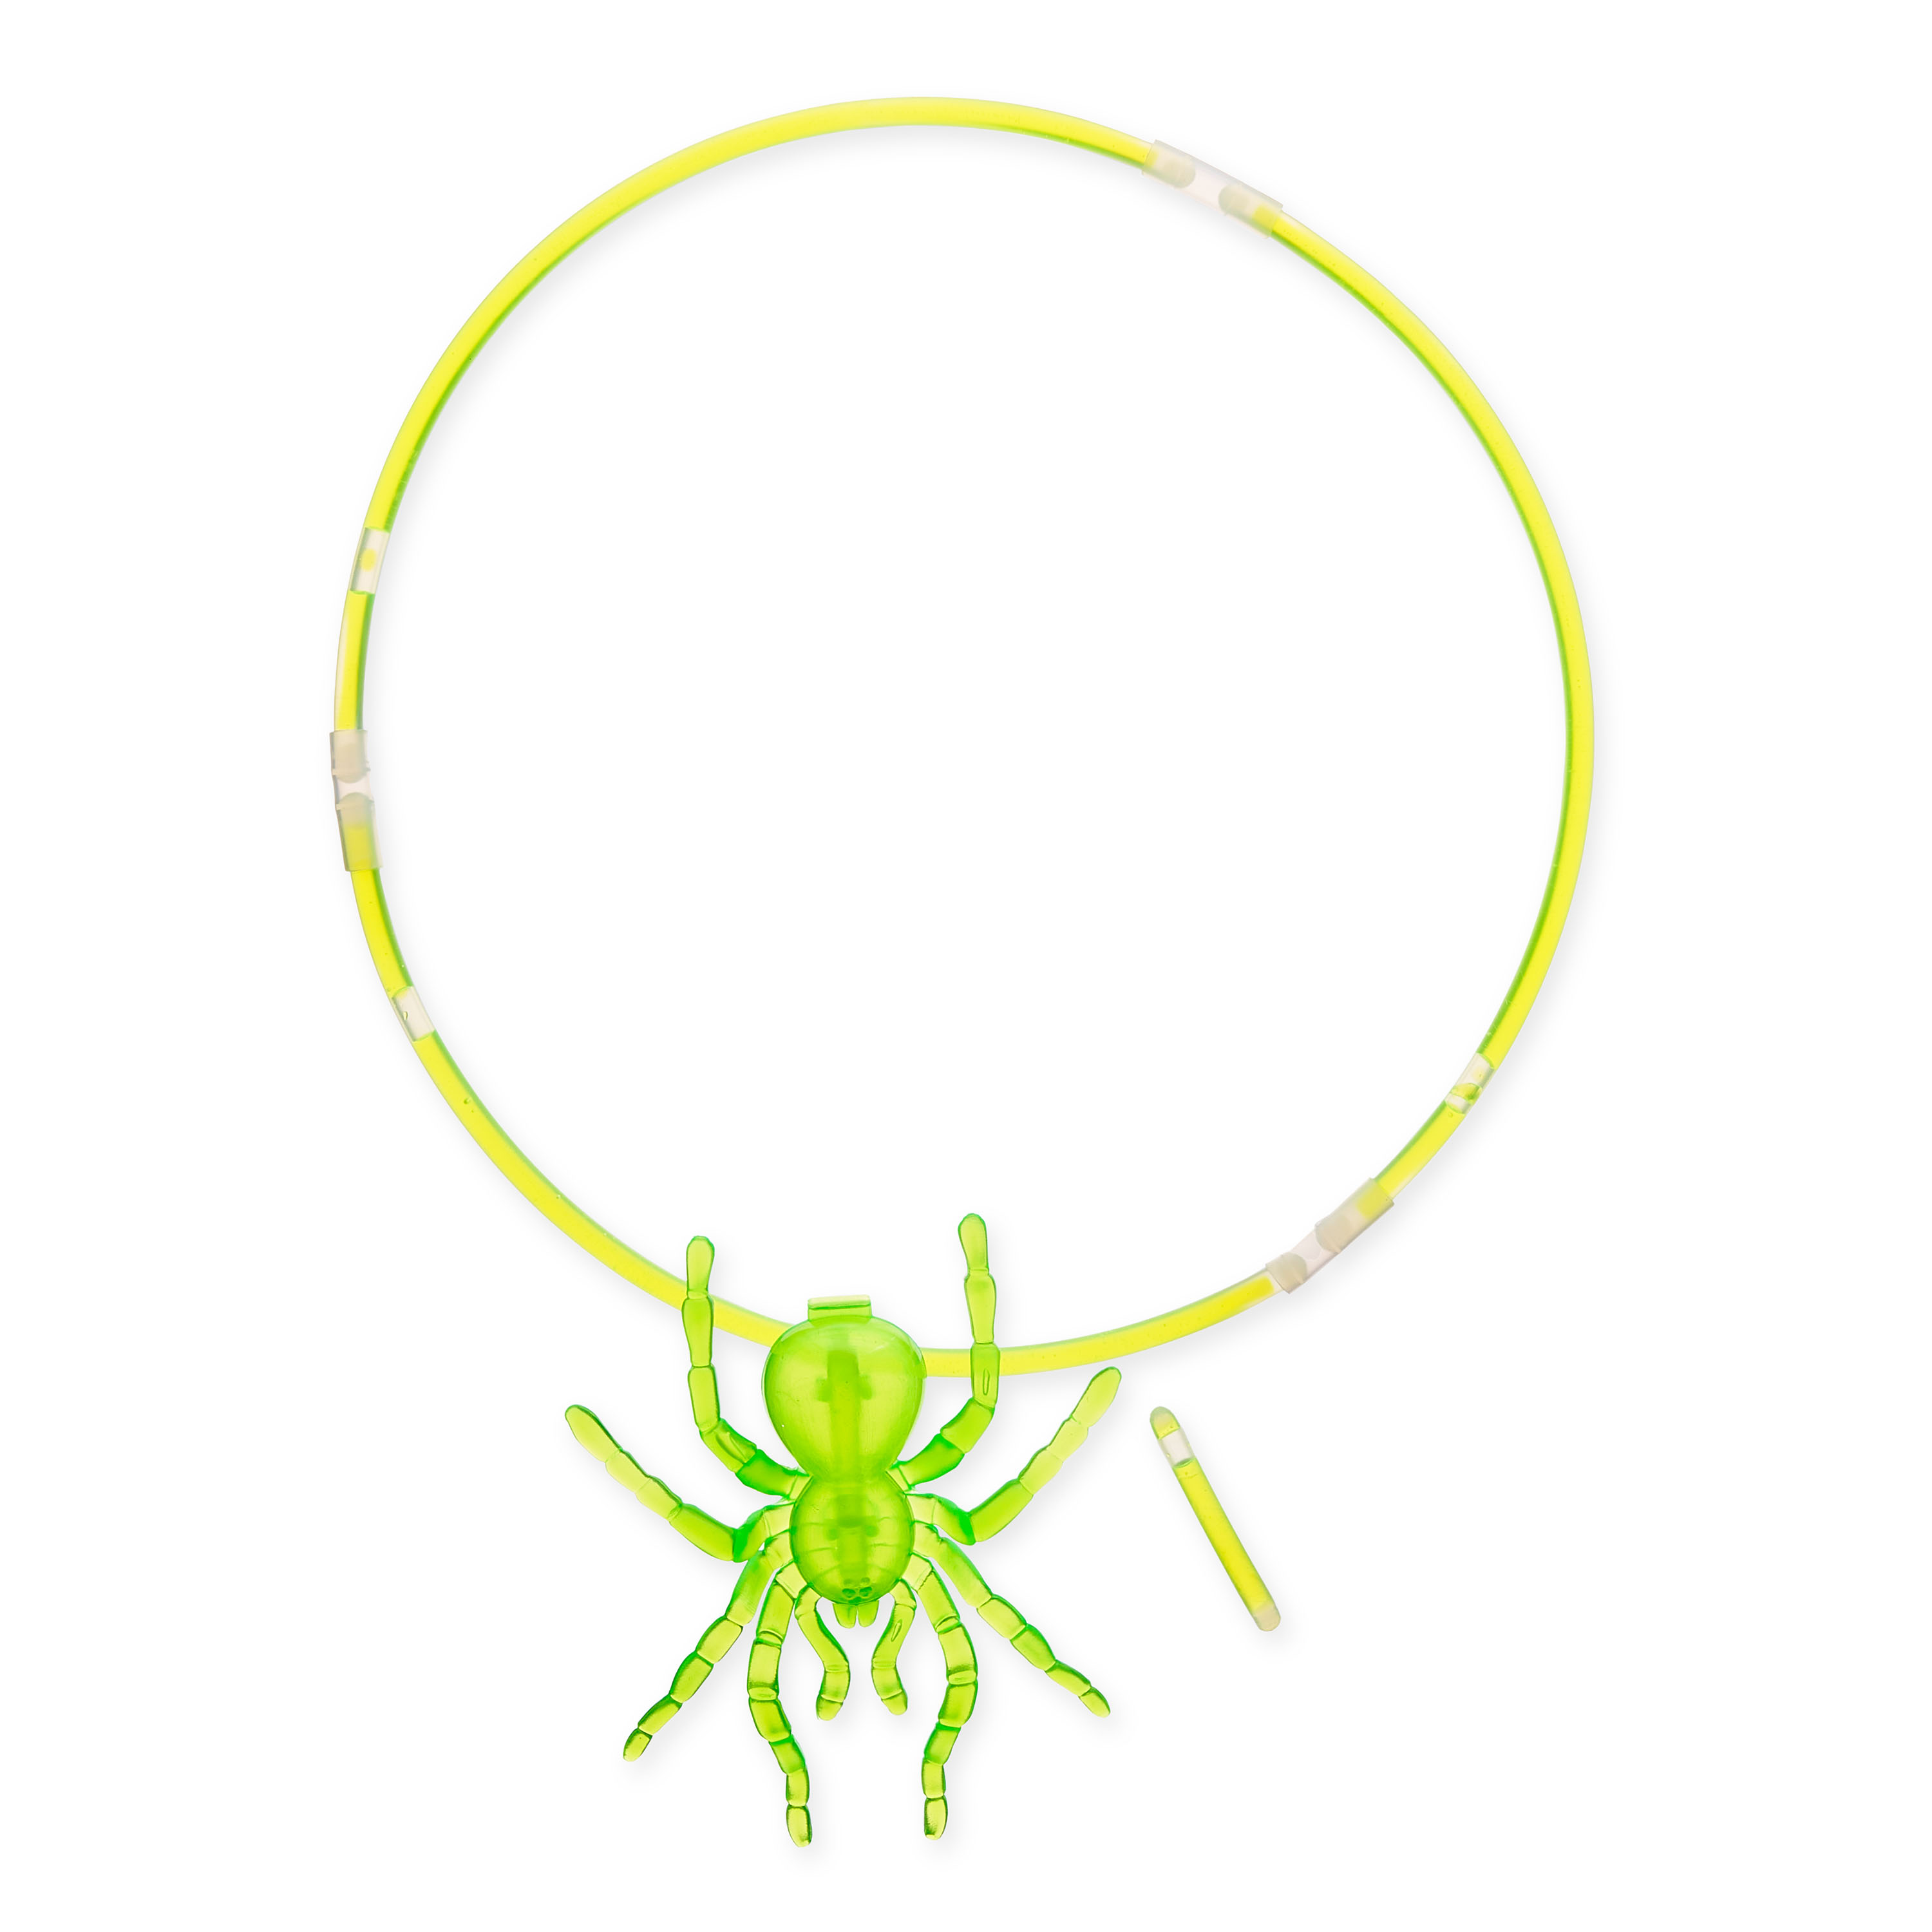 Vendor Labelling Halloween 1ct Green Glow Spider Necklace, Unisex - Childs and Adults - image 2 of 7